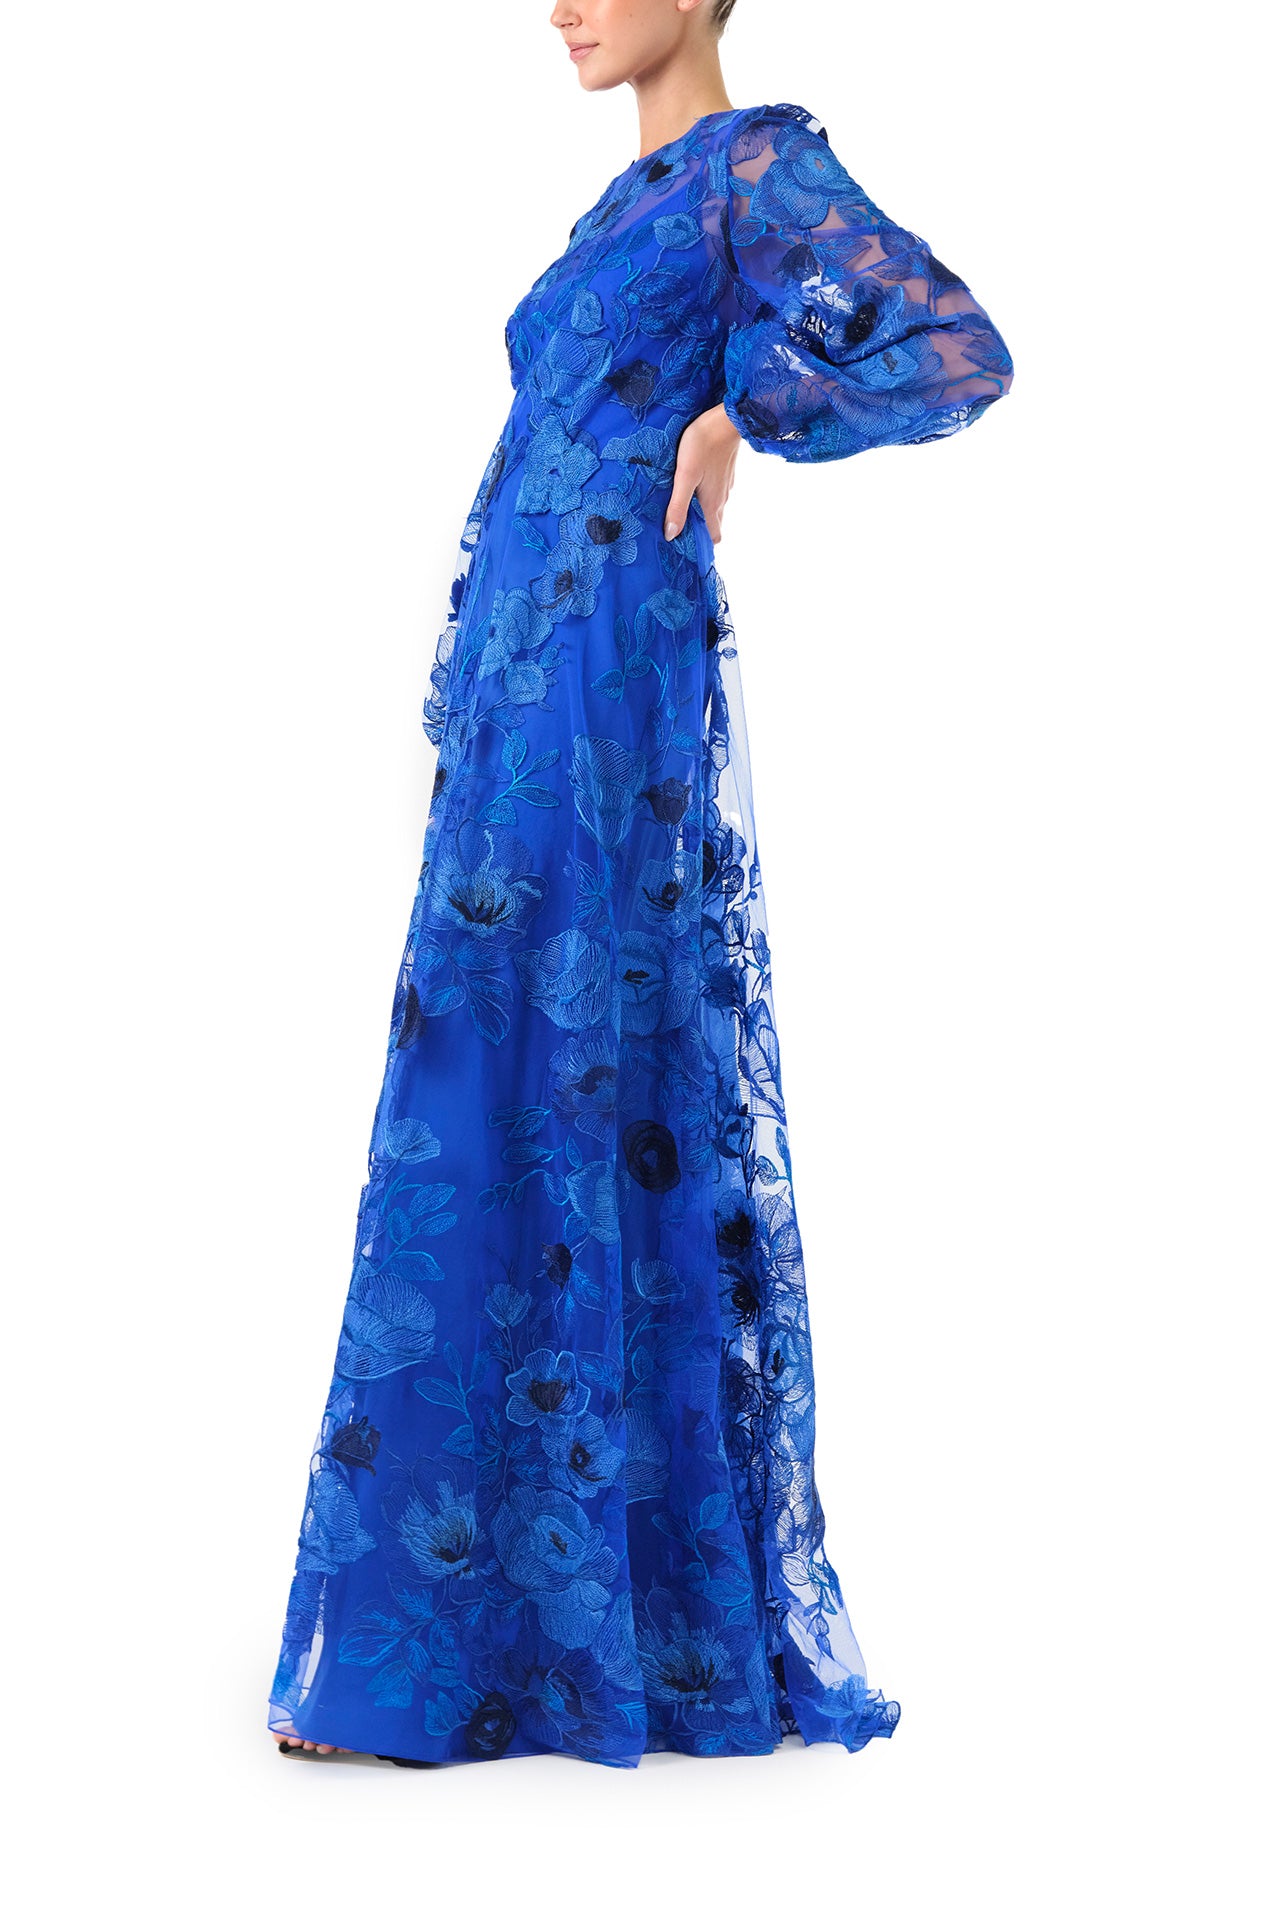 Monique Lhuilier Spring 2024 royal blue embroidered tulle long sleeve column gown with jewel neckline and detached slip lining - left side.